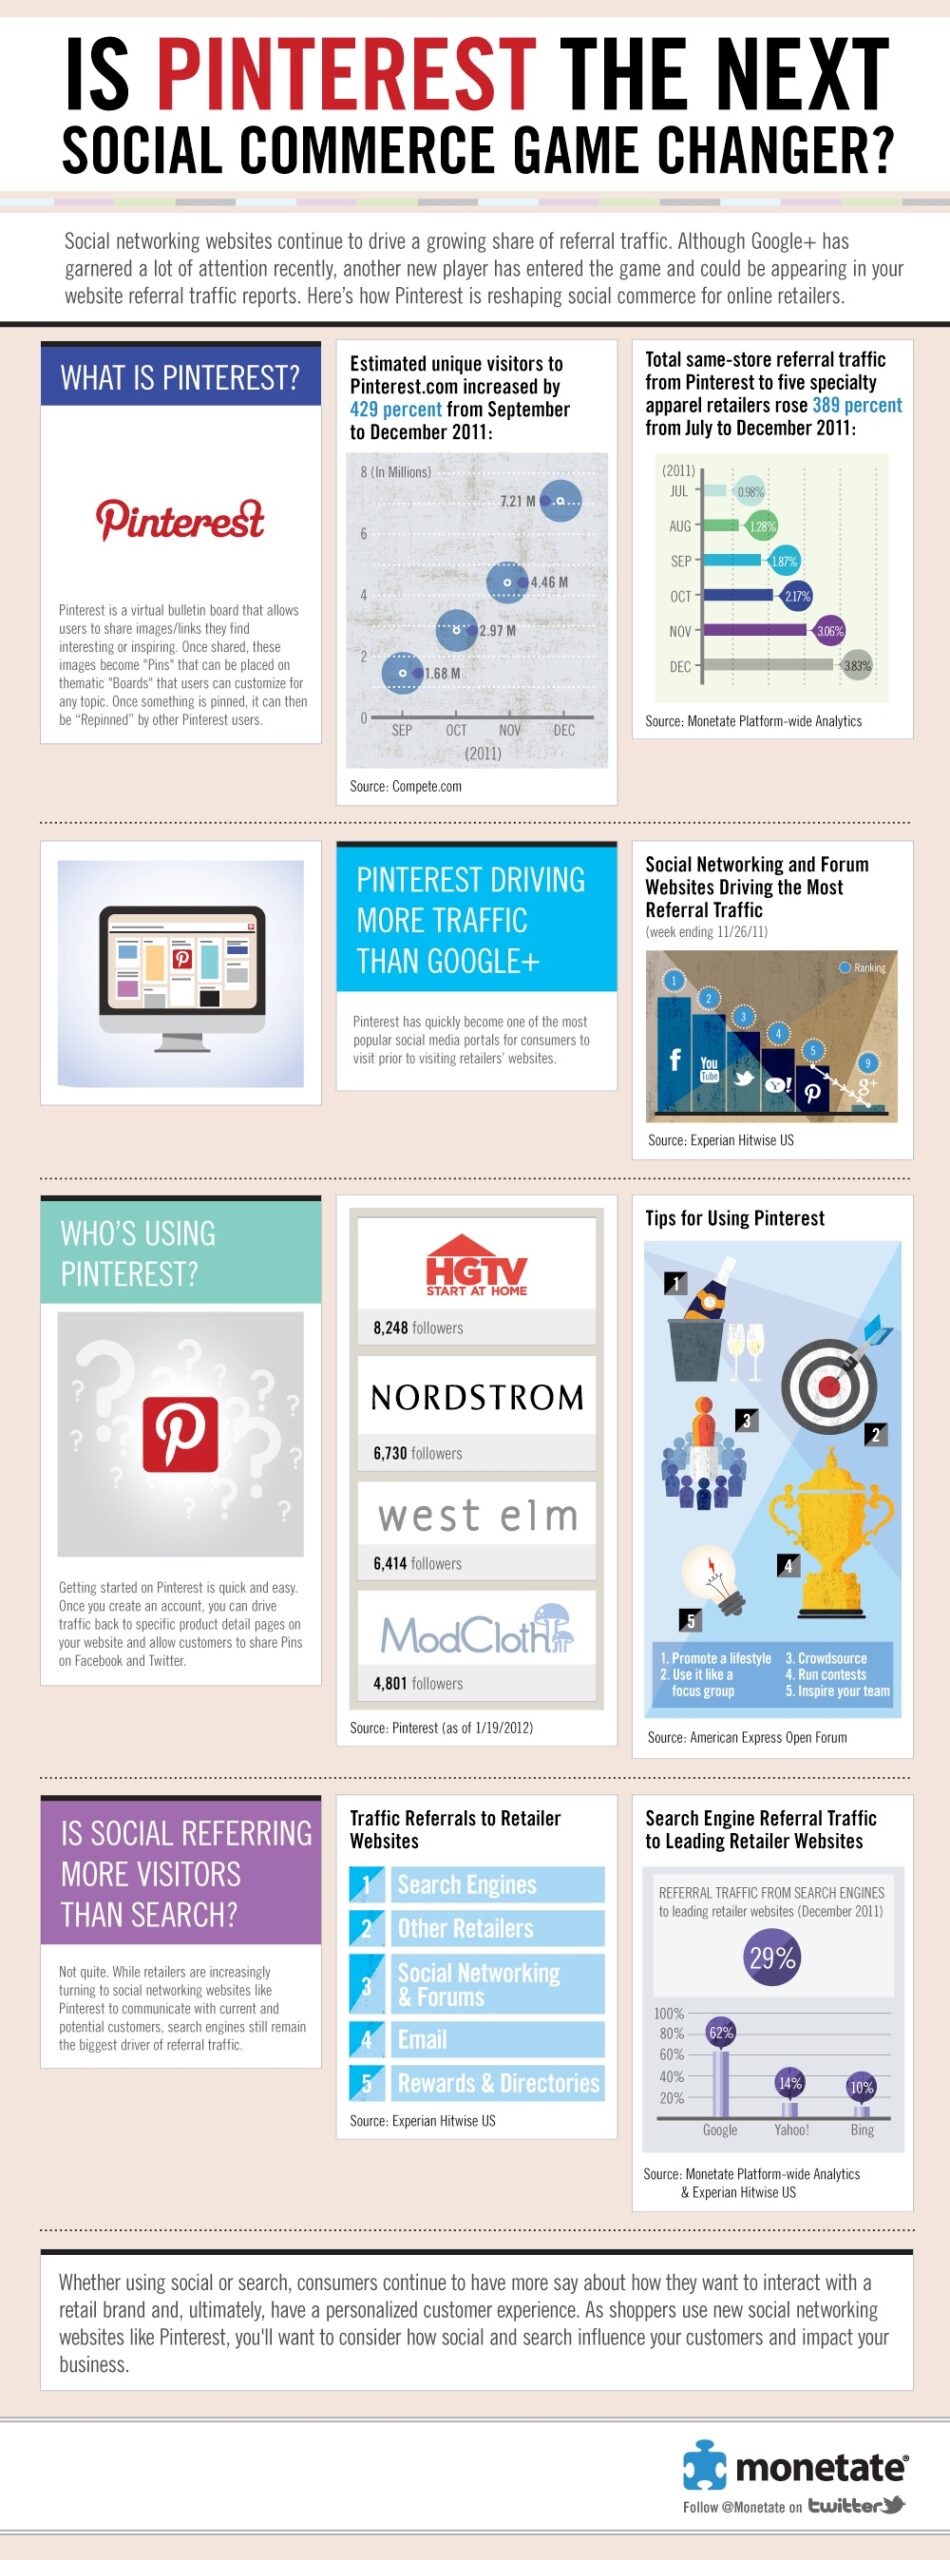 Pinterest, Attention networkers, a new channel to consolidate our brand!  #Infographic